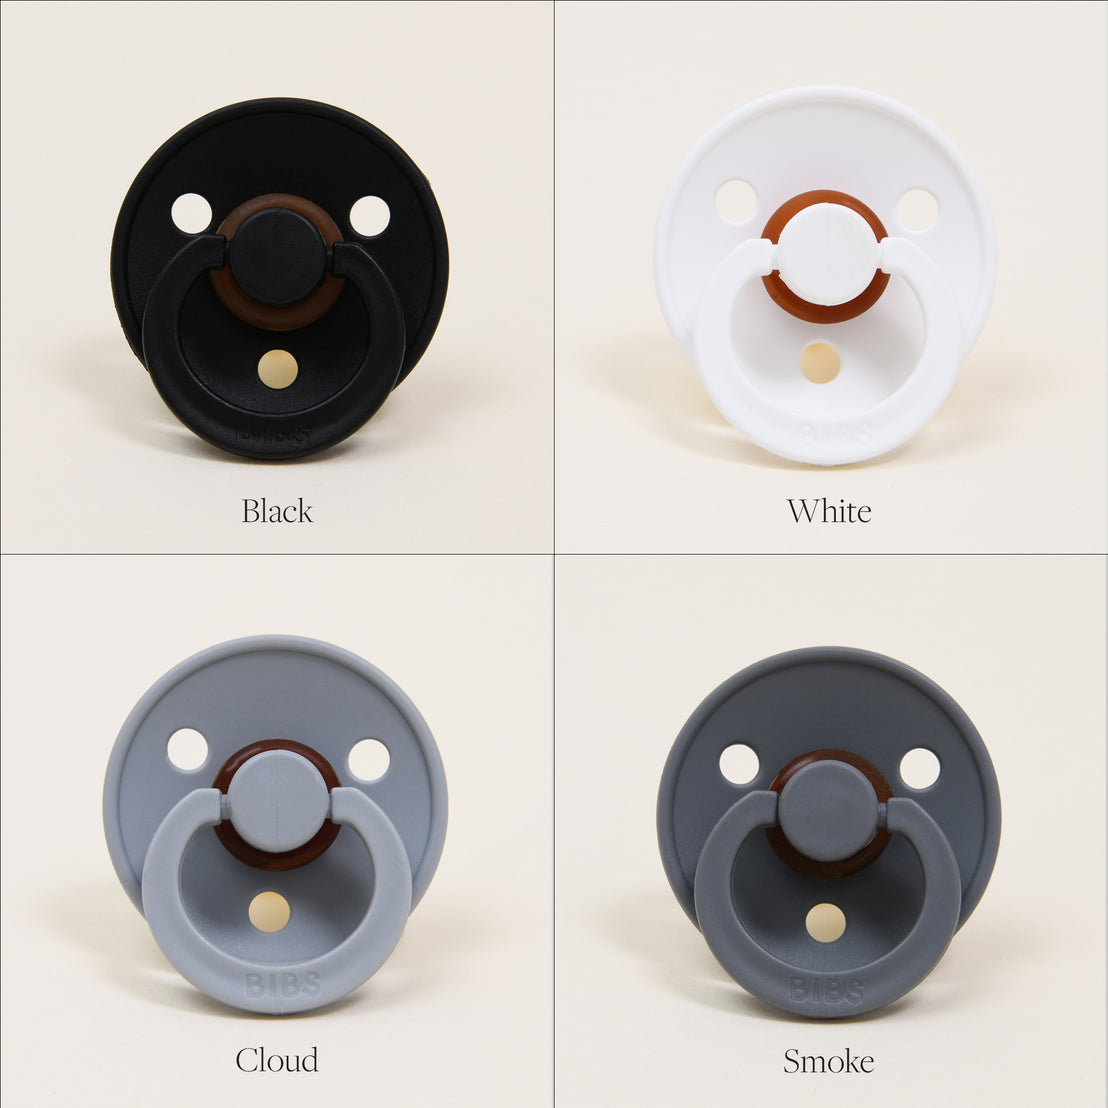 Four Bibs Pacifiers in different colors labeled as black, white, cloud, and smoke, displayed against a light background. Each natural rubber baby pacifier features a ring handle and three ventilation holes.